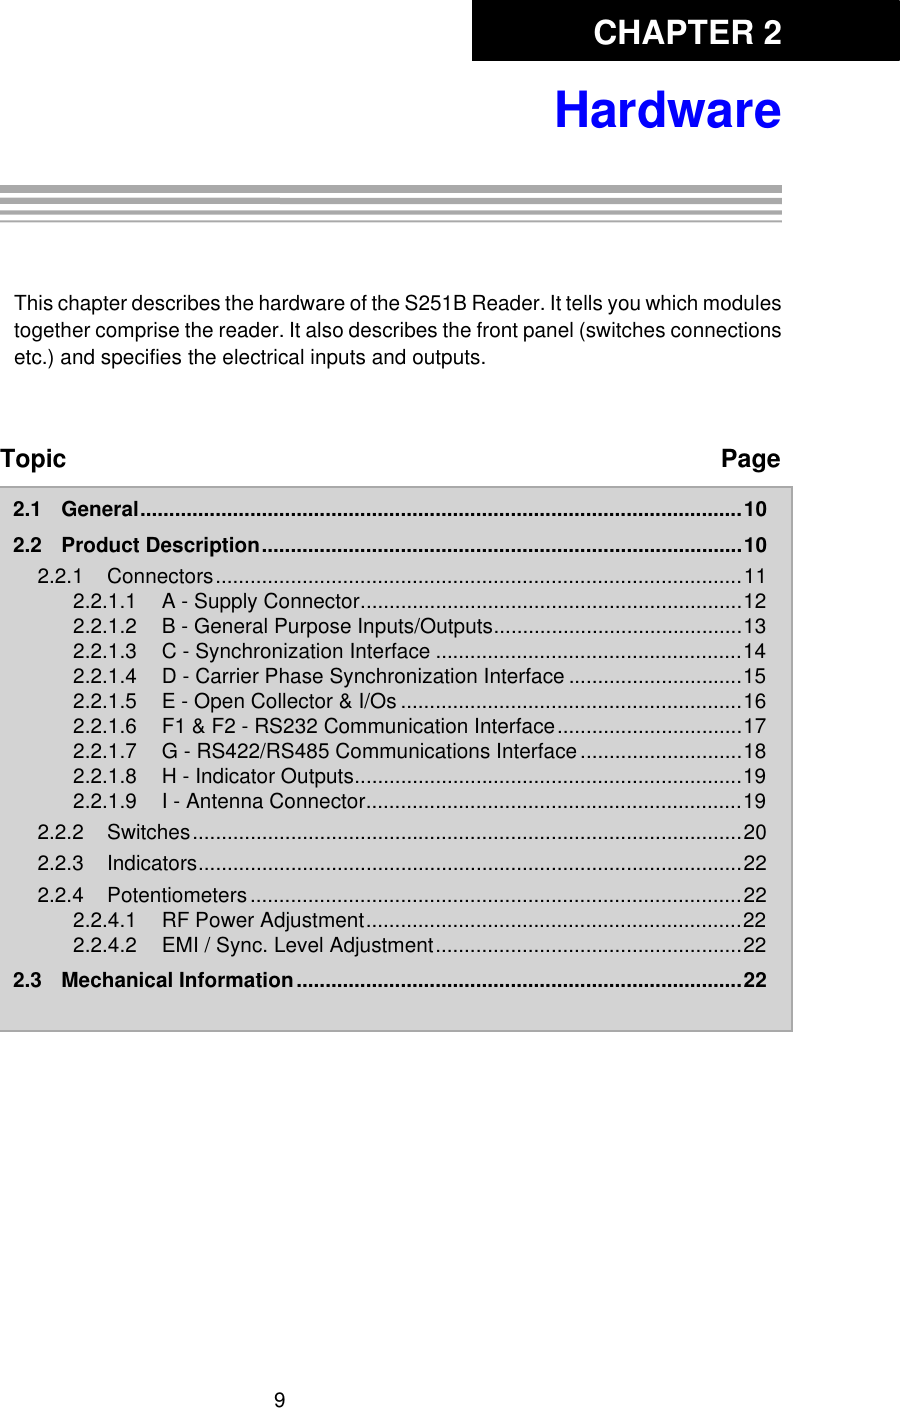 CHAPTER 29HardwareChapter 2:HardwareThis chapter describes the hardware of the S251B Reader. It tells you which modulestogether comprise the reader. It also describes the front panel (switches connectionsetc.) and specifies the electrical inputs and outputs. Topic Page2.1 General........................................................................................................102.2 Product Description...................................................................................102.2.1 Connectors...........................................................................................112.2.1.1 A - Supply Connector..................................................................122.2.1.2 B - General Purpose Inputs/Outputs...........................................132.2.1.3 C - Synchronization Interface .....................................................142.2.1.4 D - Carrier Phase Synchronization Interface ..............................152.2.1.5 E - Open Collector &amp; I/Os ...........................................................162.2.1.6 F1 &amp; F2 - RS232 Communication Interface................................172.2.1.7 G - RS422/RS485 Communications Interface............................182.2.1.8 H - Indicator Outputs...................................................................192.2.1.9 I - Antenna Connector.................................................................192.2.2 Switches...............................................................................................202.2.3 Indicators..............................................................................................222.2.4 Potentiometers.....................................................................................222.2.4.1 RF Power Adjustment.................................................................222.2.4.2 EMI / Sync. Level Adjustment.....................................................222.3 Mechanical Information.............................................................................22